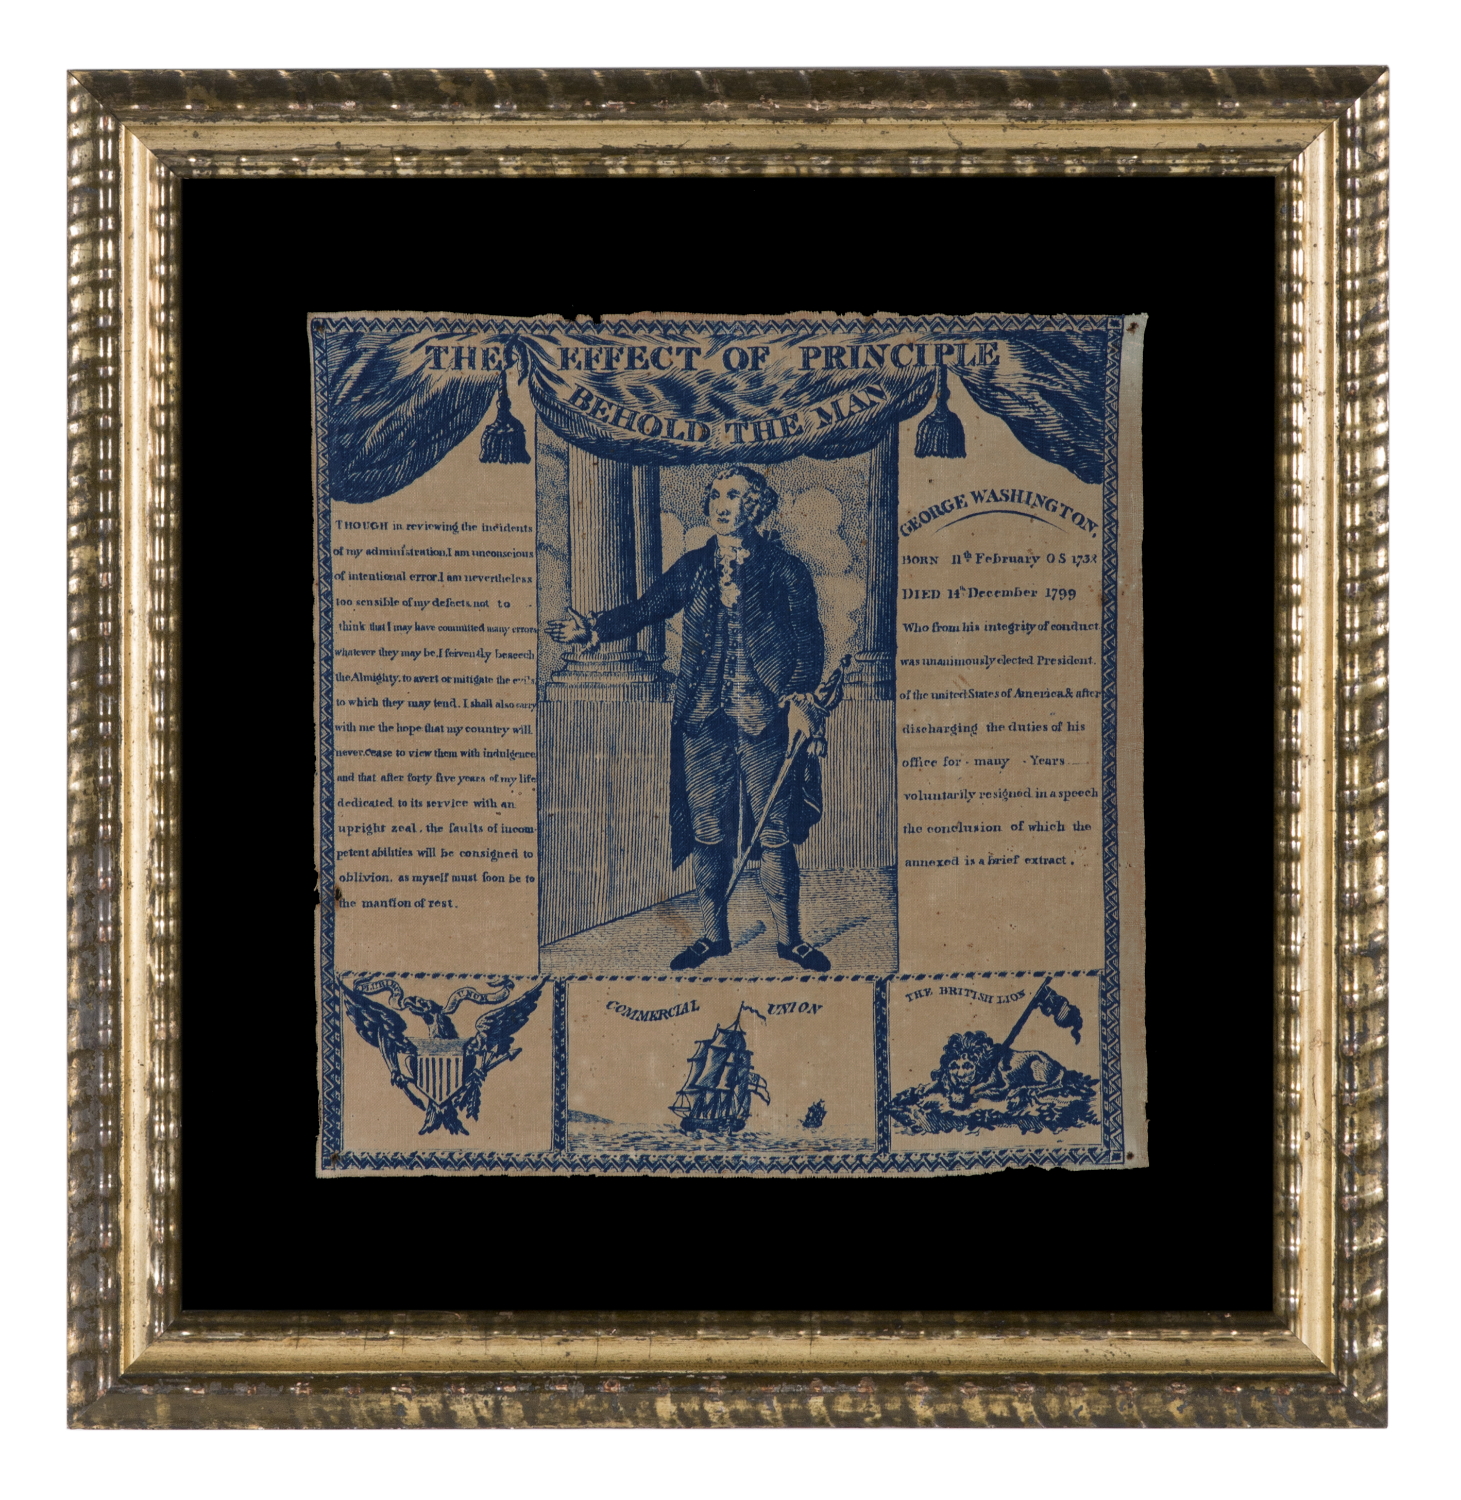 EXTRAORDINARILY EARLY (1806) PRINTED LINEN KERCHIEF GLORIFYING GEORGE WASHINGTON, PRINT WORKS, GERMANTOWN, PENNSYLVANIA; EXHIBITED JANUARY – AUGUST, 2023 AT THE MUSEUM OF THE AMERICAN REVOLUTION